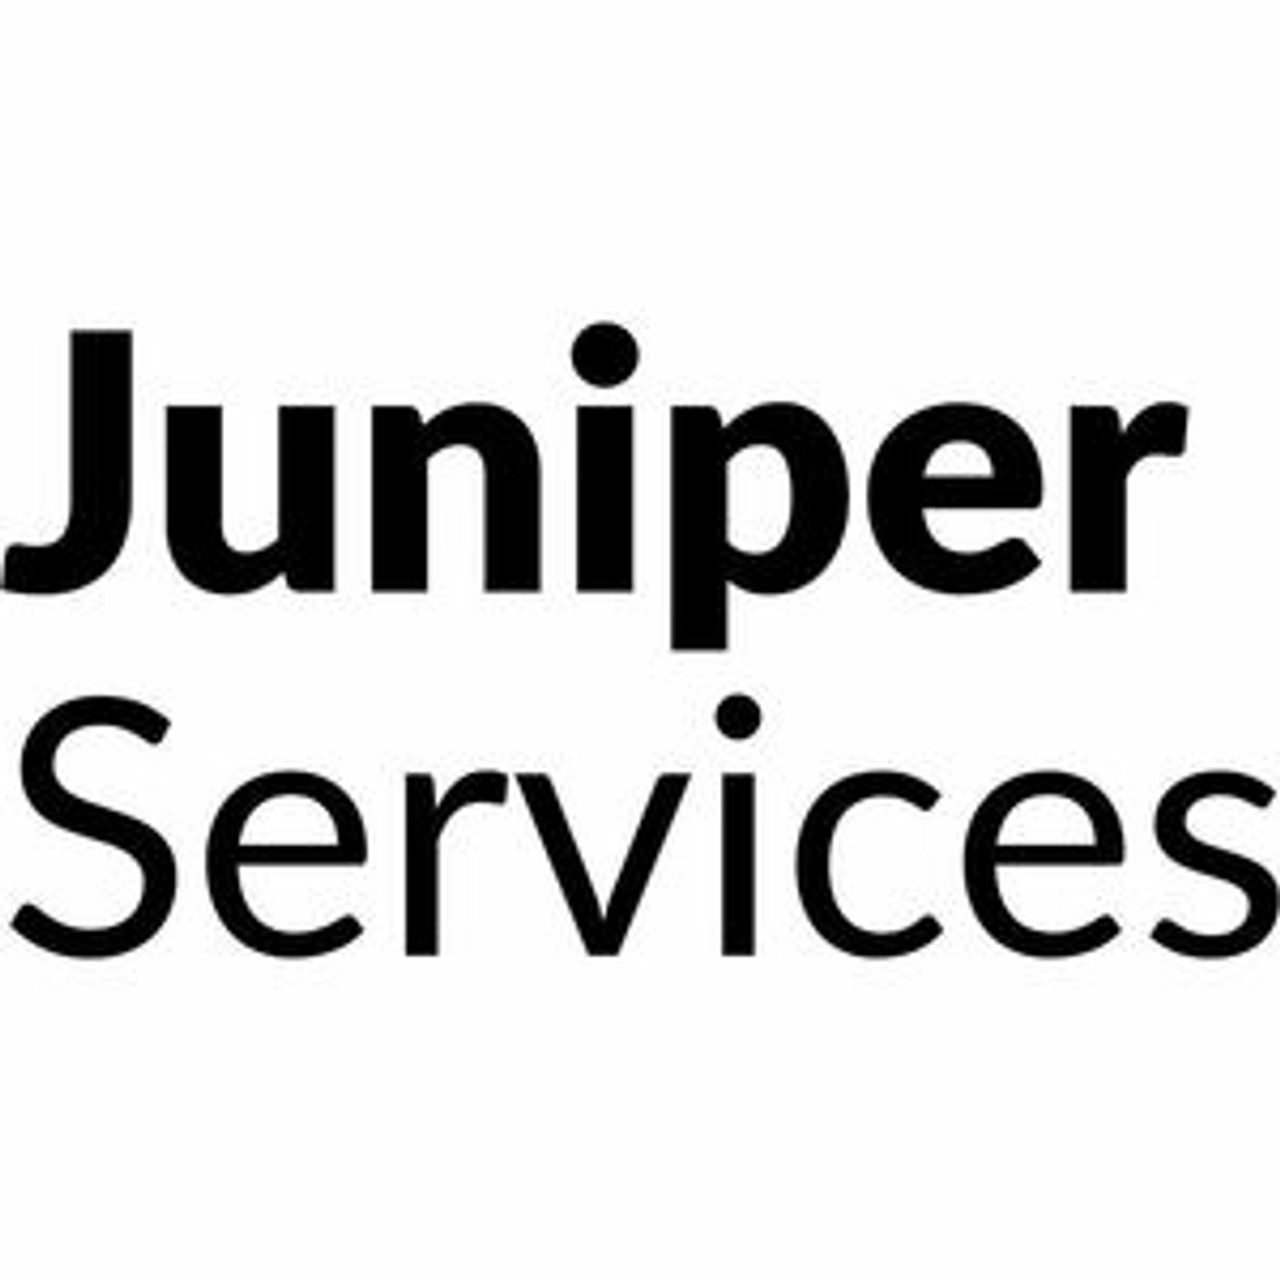 Juniper 10G 1 Year Subscription. Includes Full Scale L3 Features and 16 L3VPN Instances